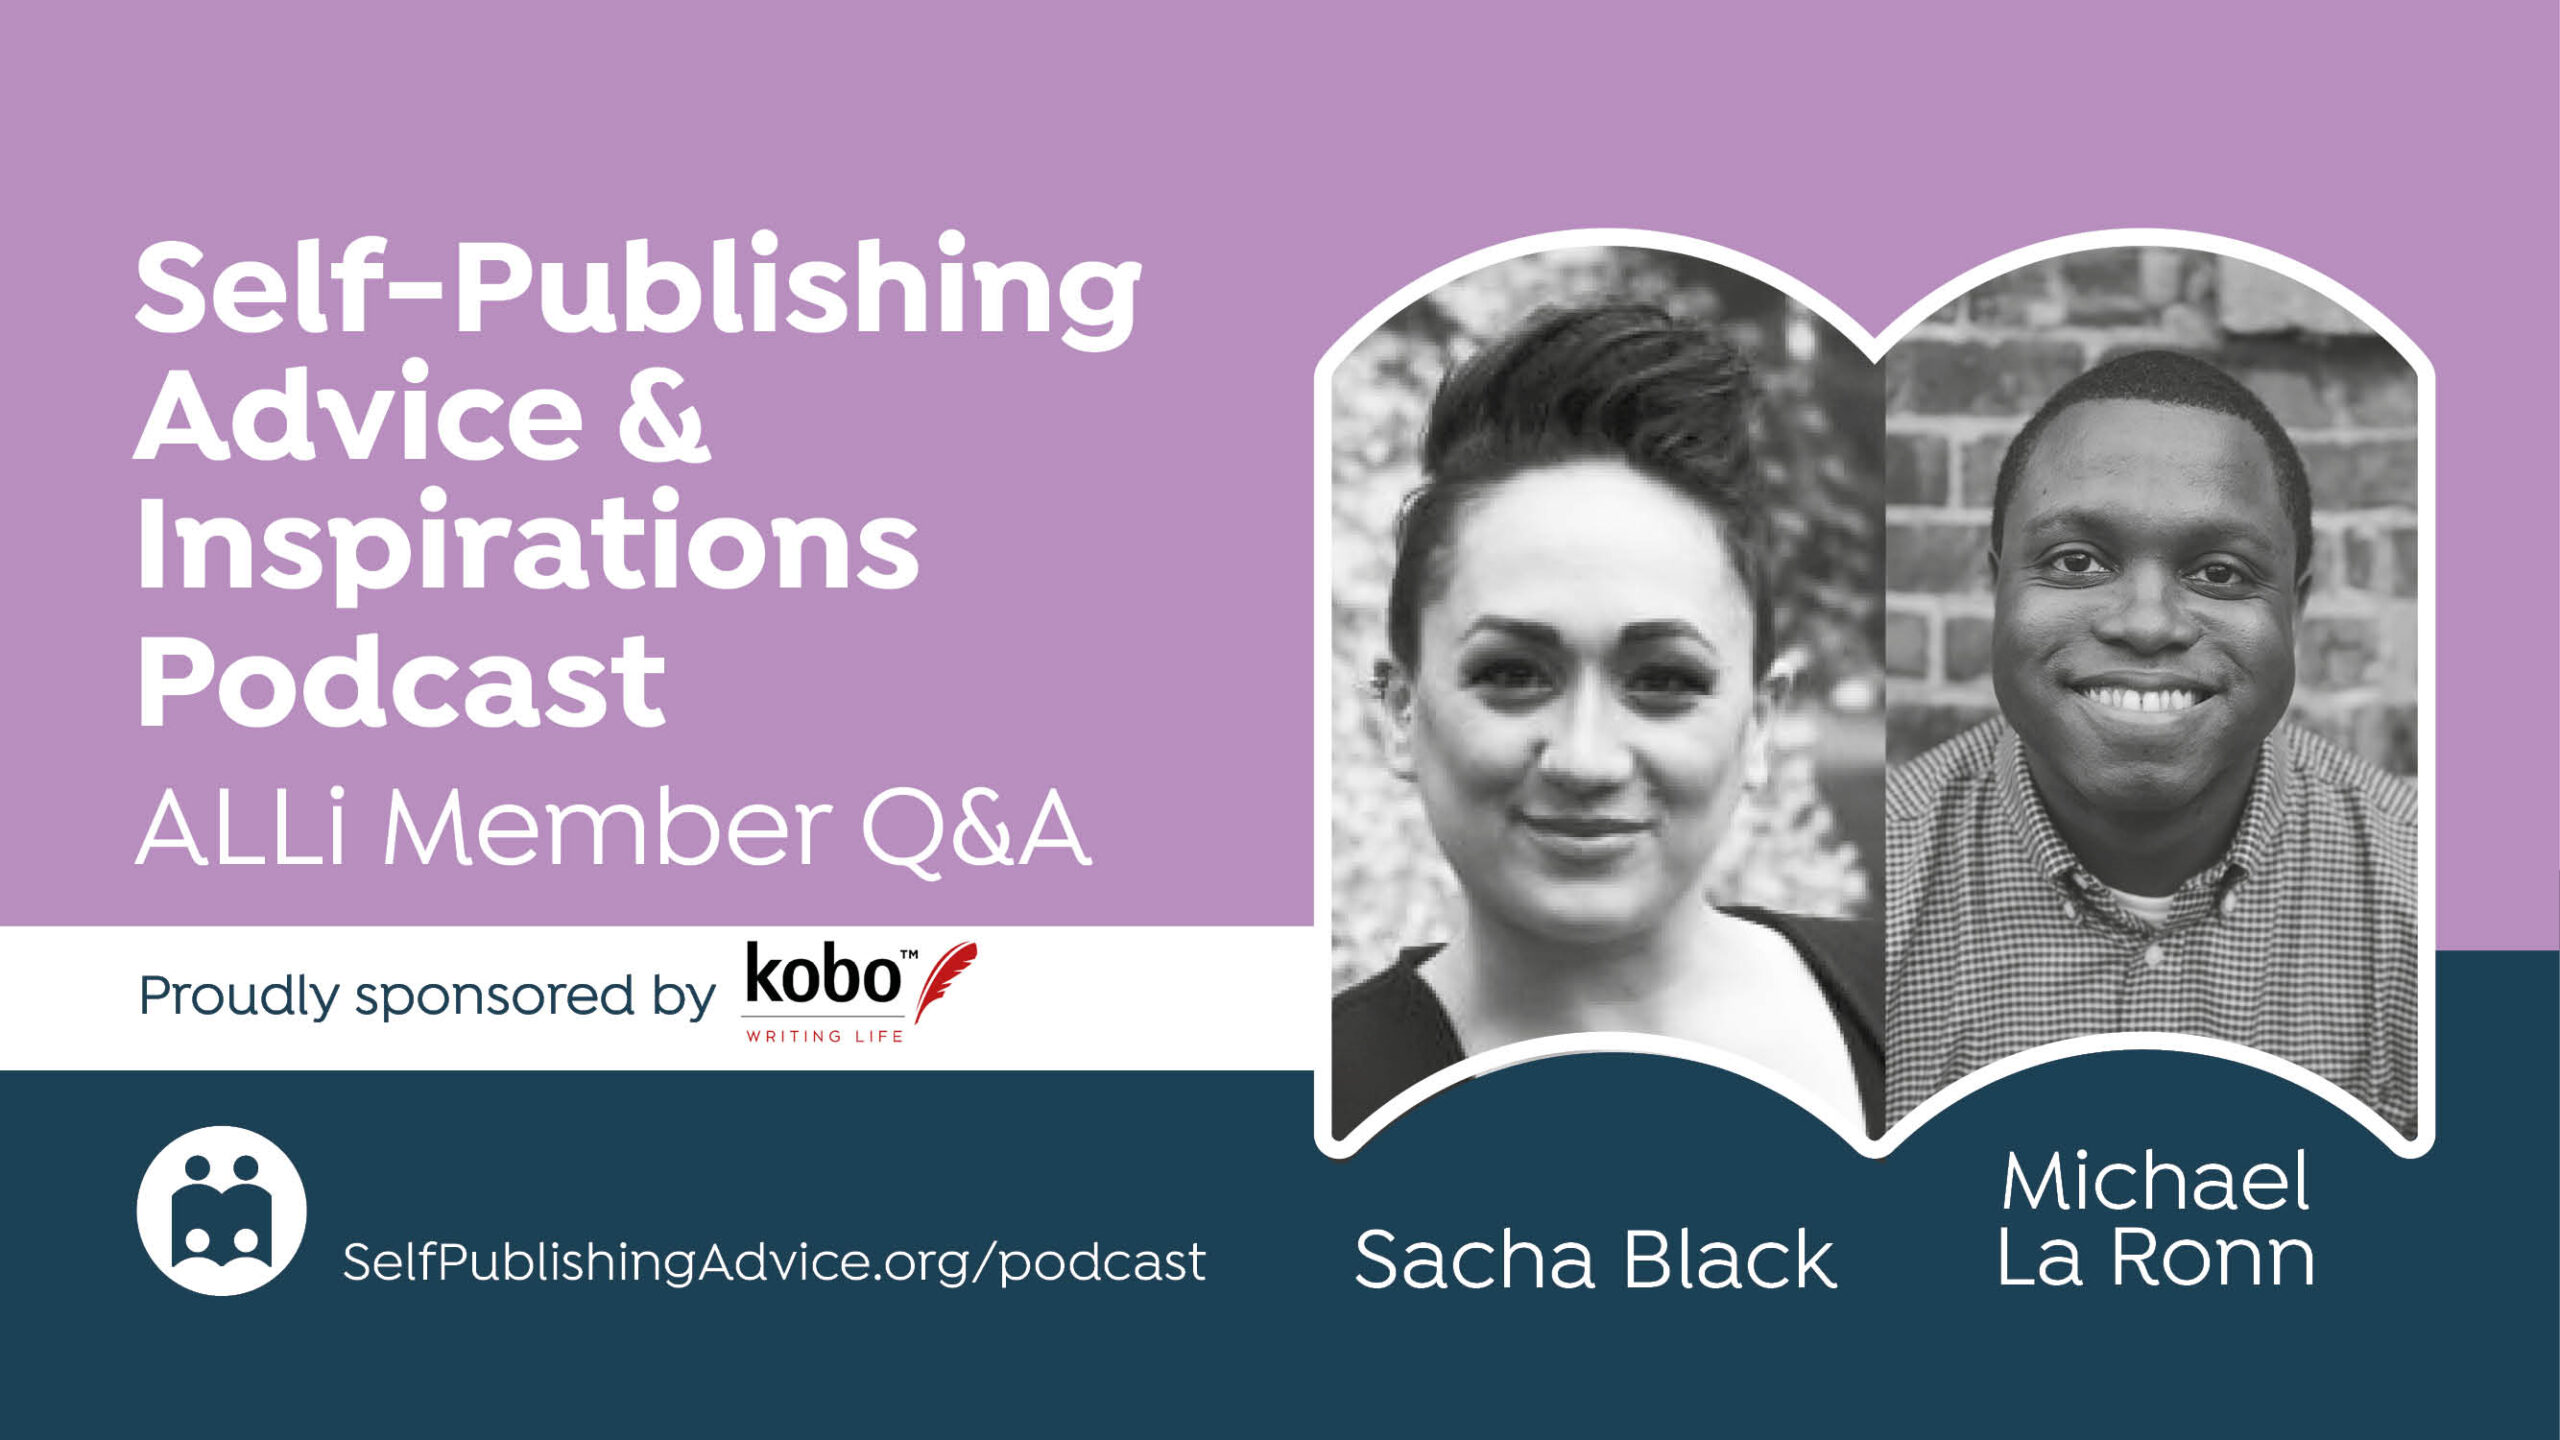 Young Author Problems, Author Interviews In Books, Content Limits On Amazon, And More Questions Answered By Michael La Ronn And Sacha Black In Our Member Q&A Podcast